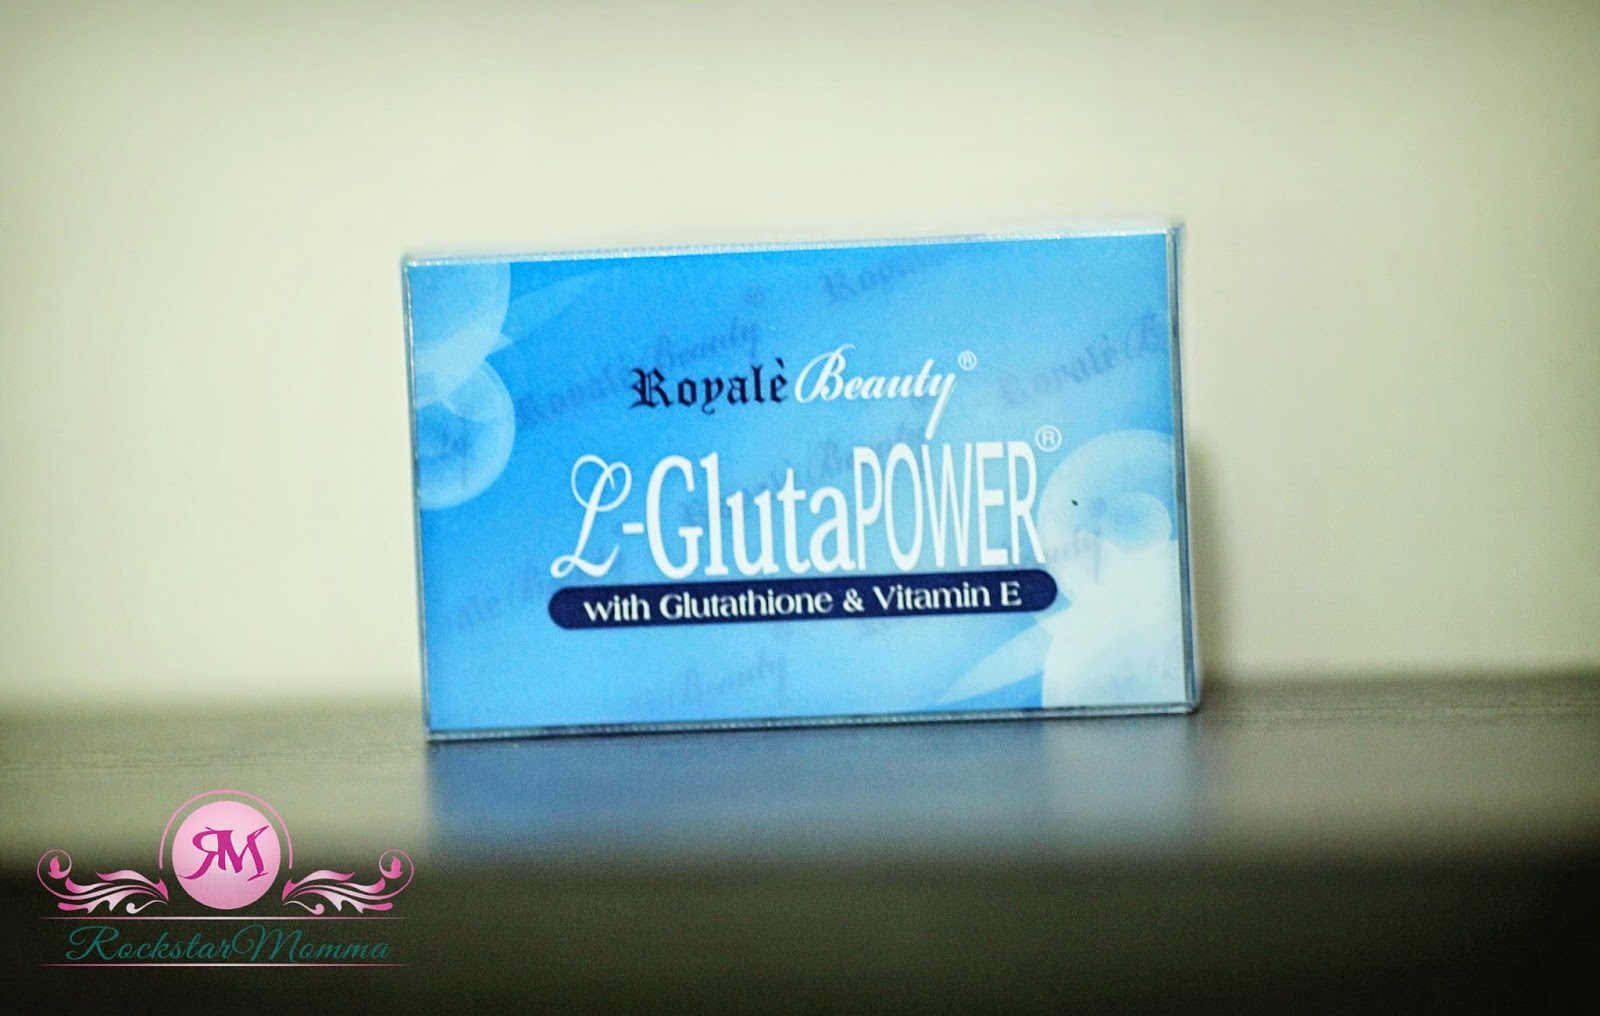 Rockstarmomma Product Review Royale Beauty L Gluta Power Whitening Soap